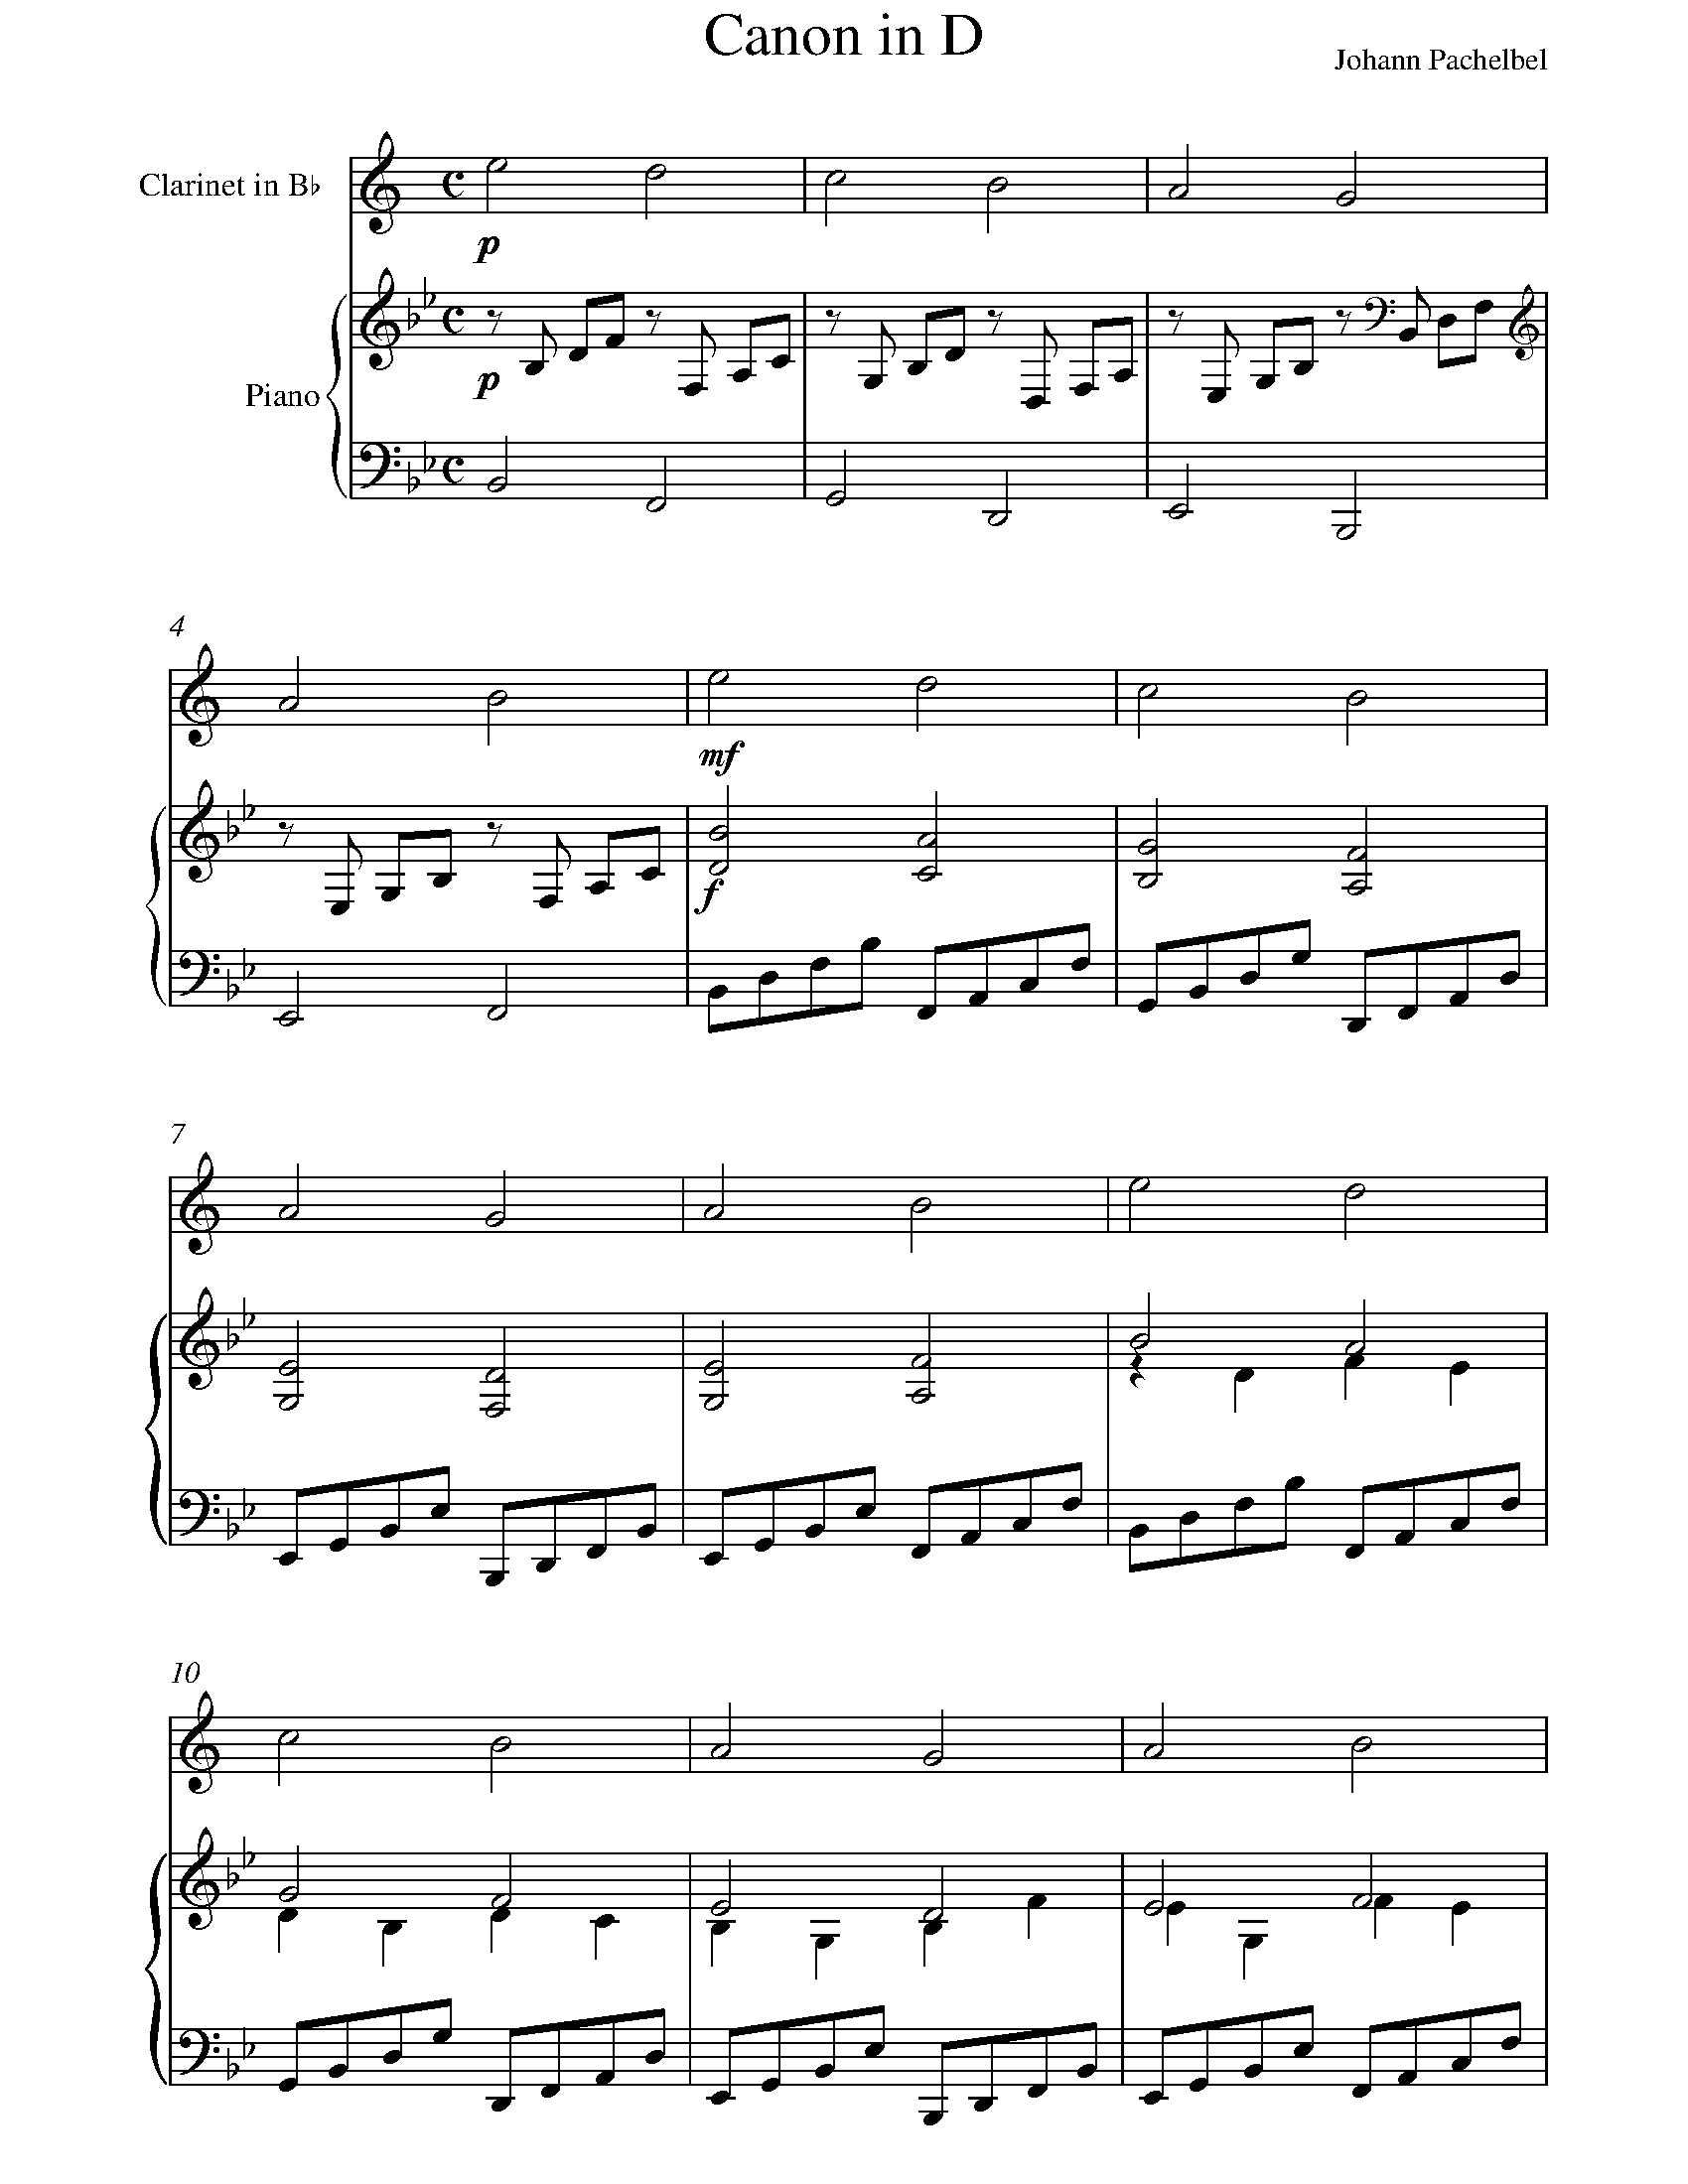 Pachelbel - Canon In D Sheet Music For Clarinet - 8Notes - Canon In D Piano Sheet Music Free Printable